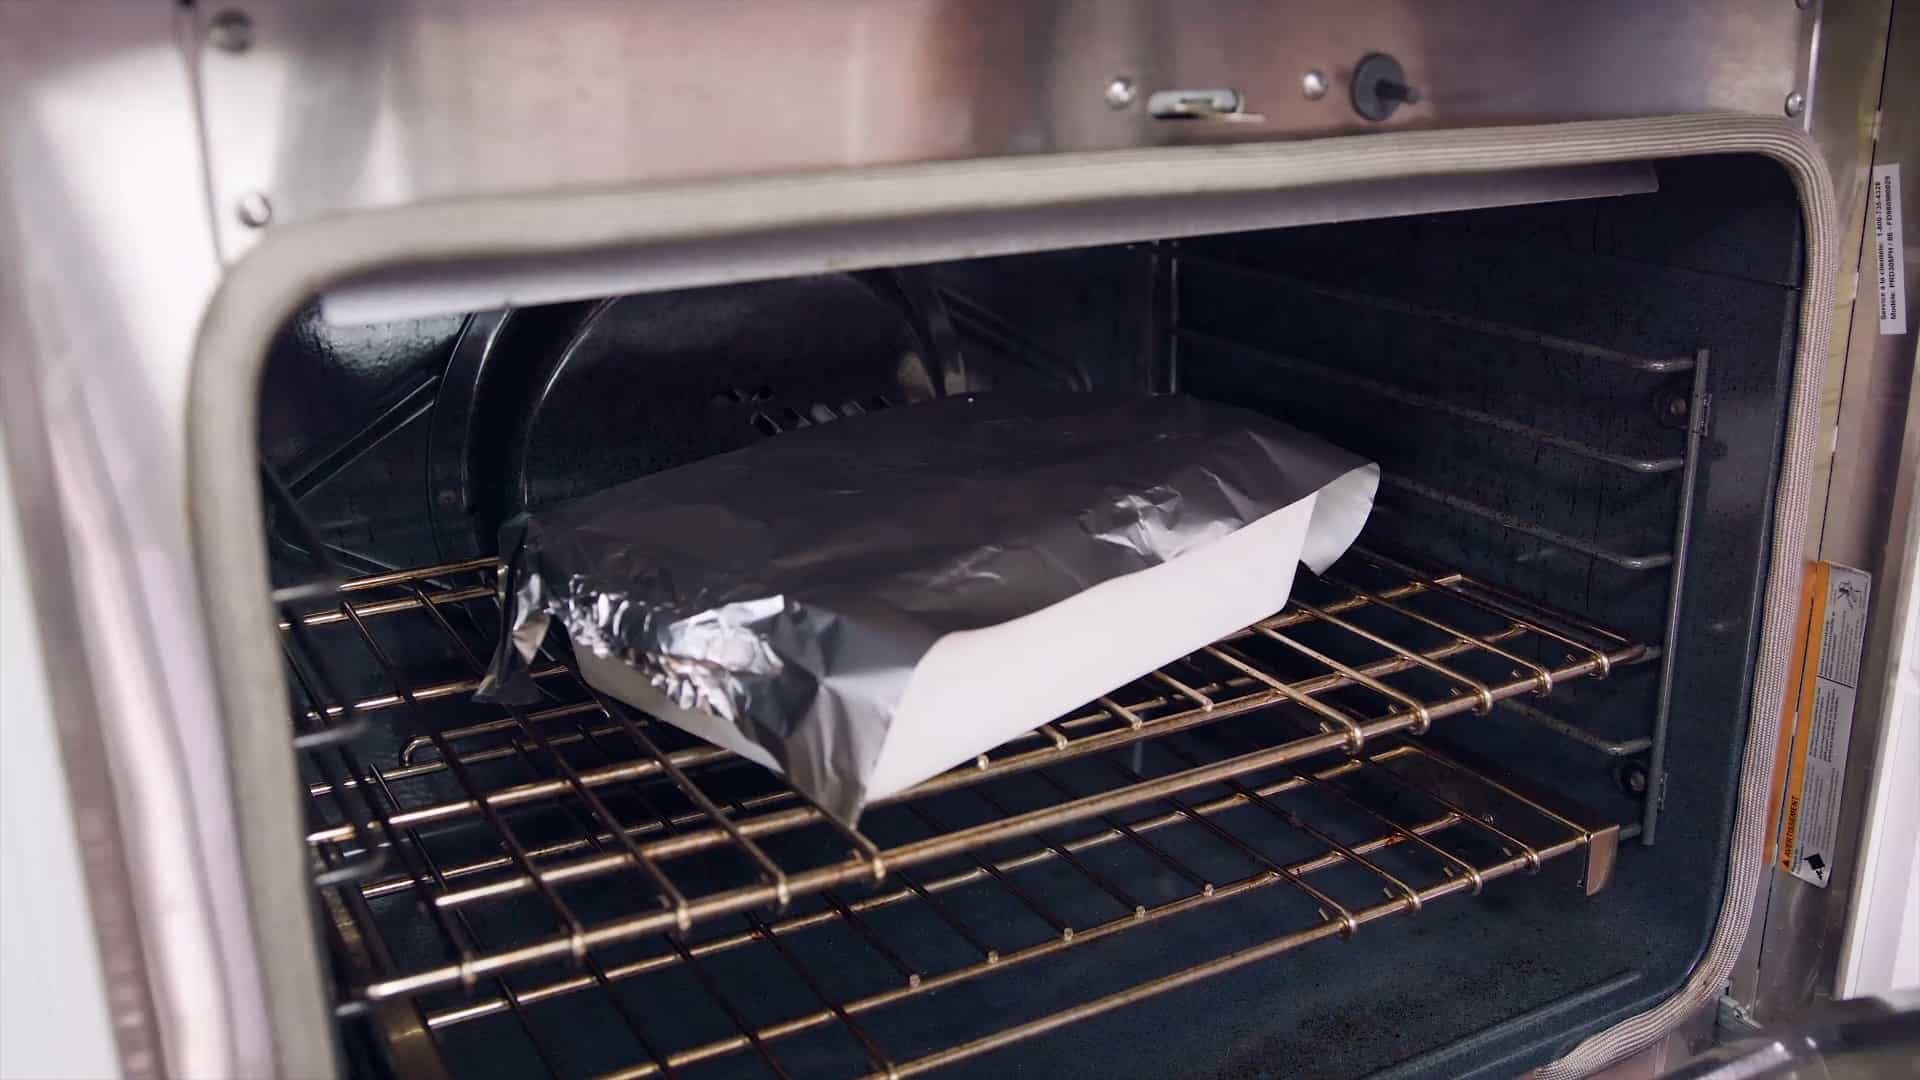 Angled view of an open oven with a high sided white glass casserole dish topped with a long sheet of aluminum foil shiny side facing down all on a metal rack in the middle of the oven.